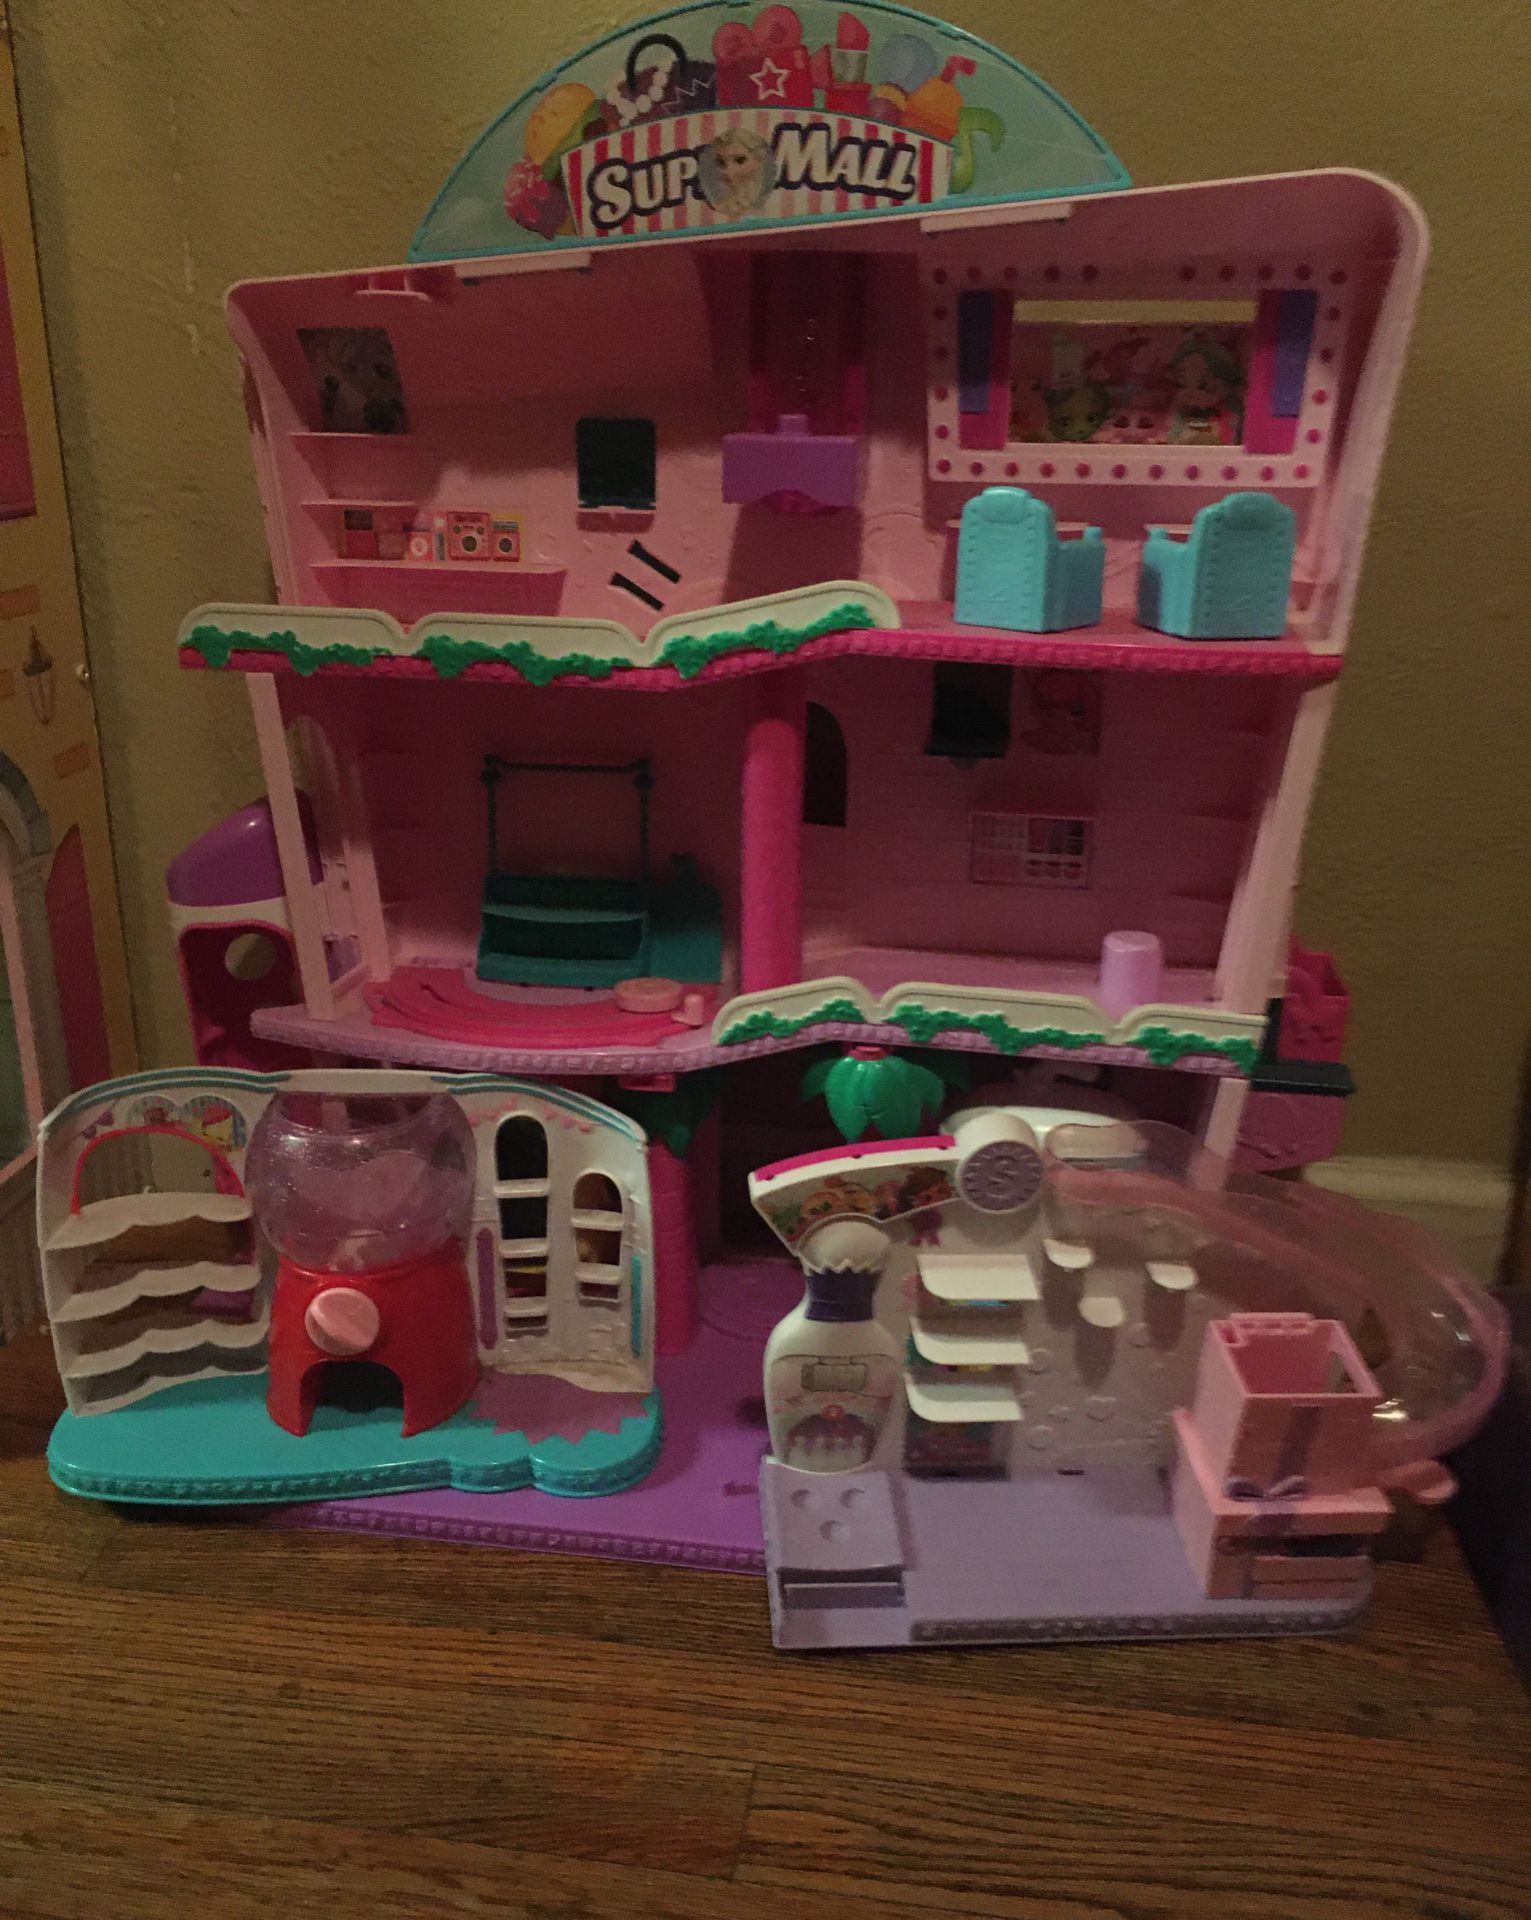 Shopkins Super Mall and two other Shopkins playsets